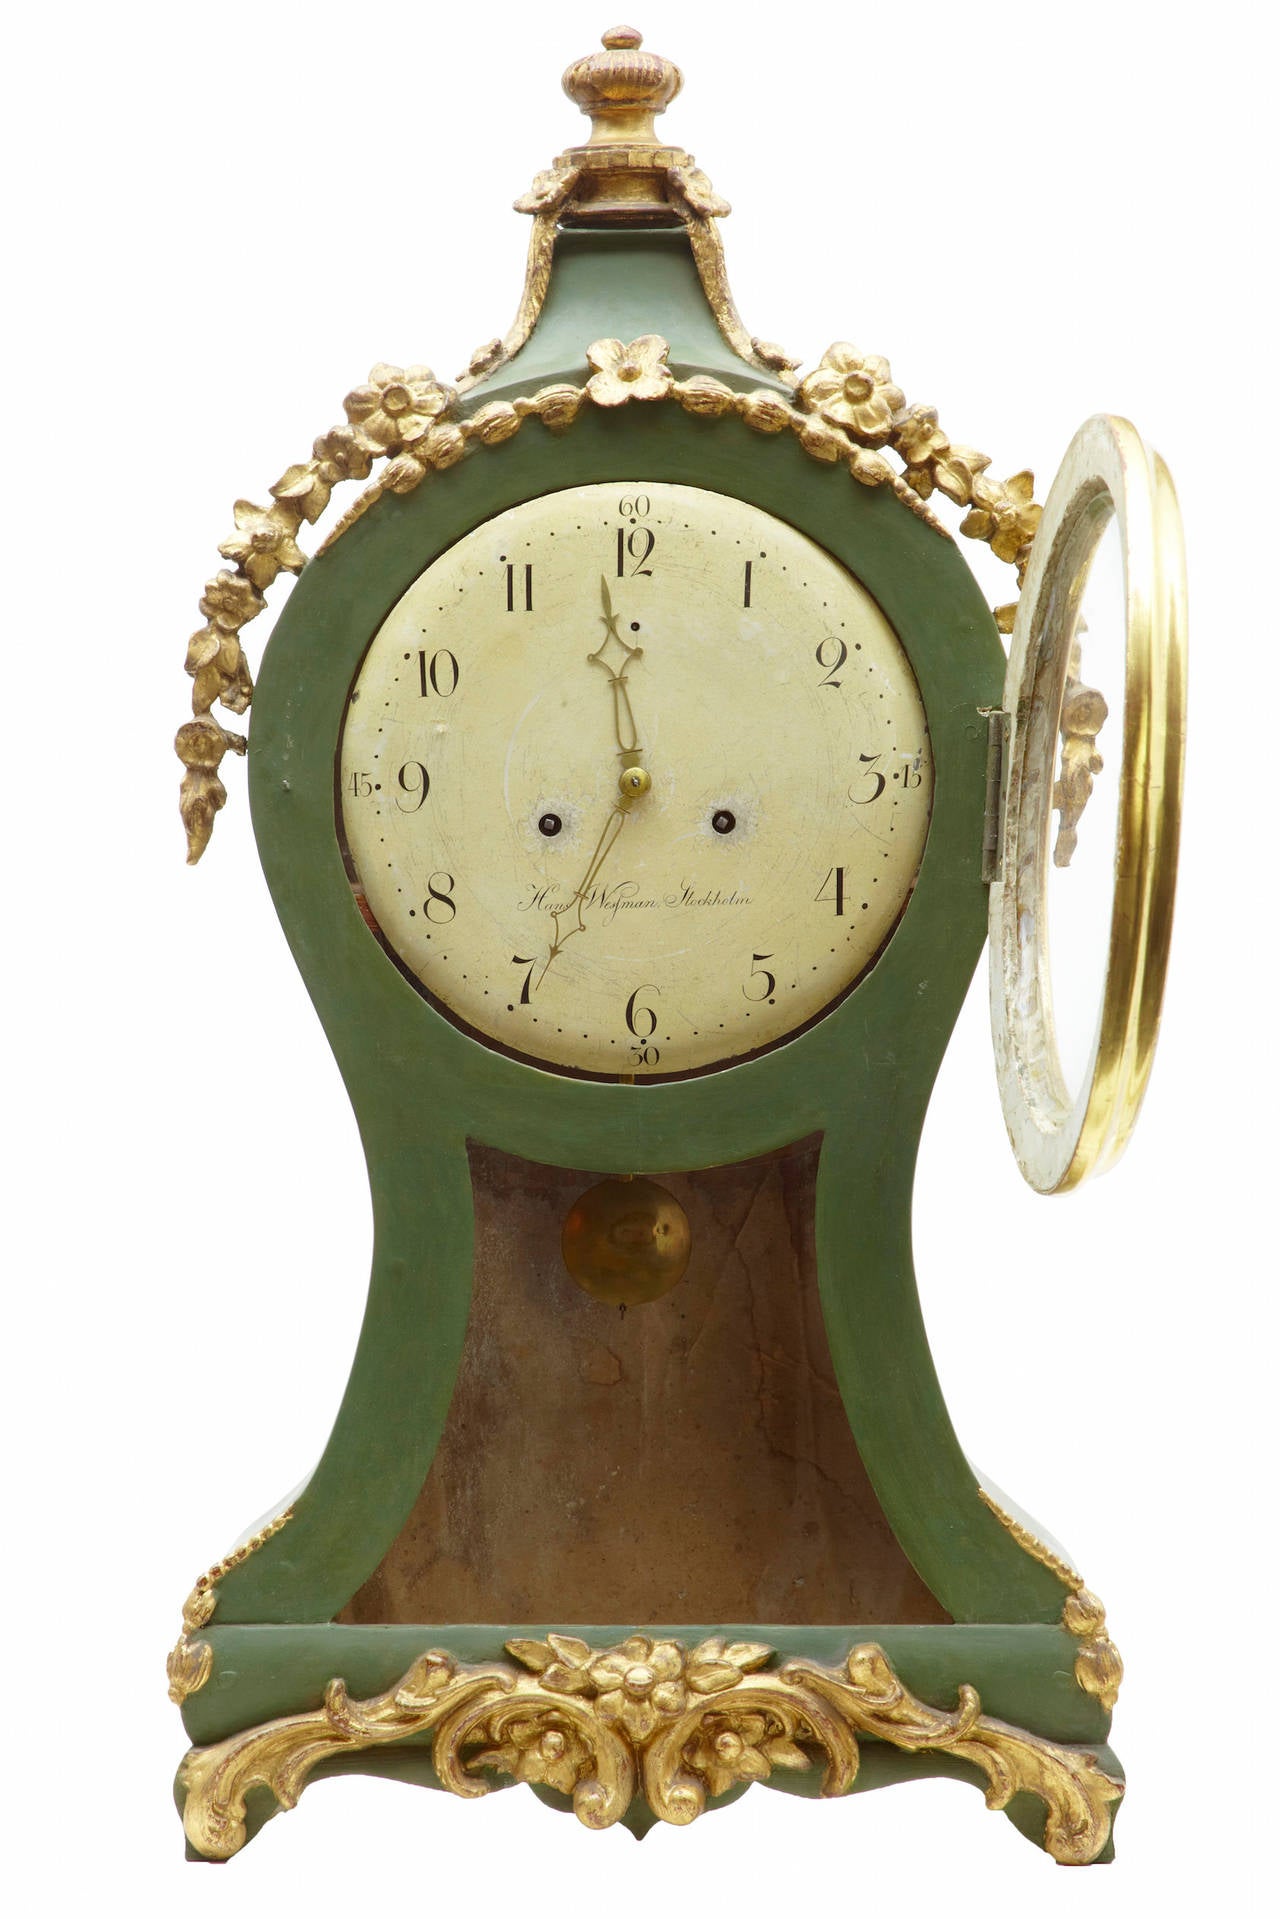 Fine quality Swedish clock in original condition, circa 1790 

Painted green with gilt carved wood decoration. 

Clock face signed Hans Westman, Stockholm 

Will be fully serviced upon sale

Measures: Height: 33